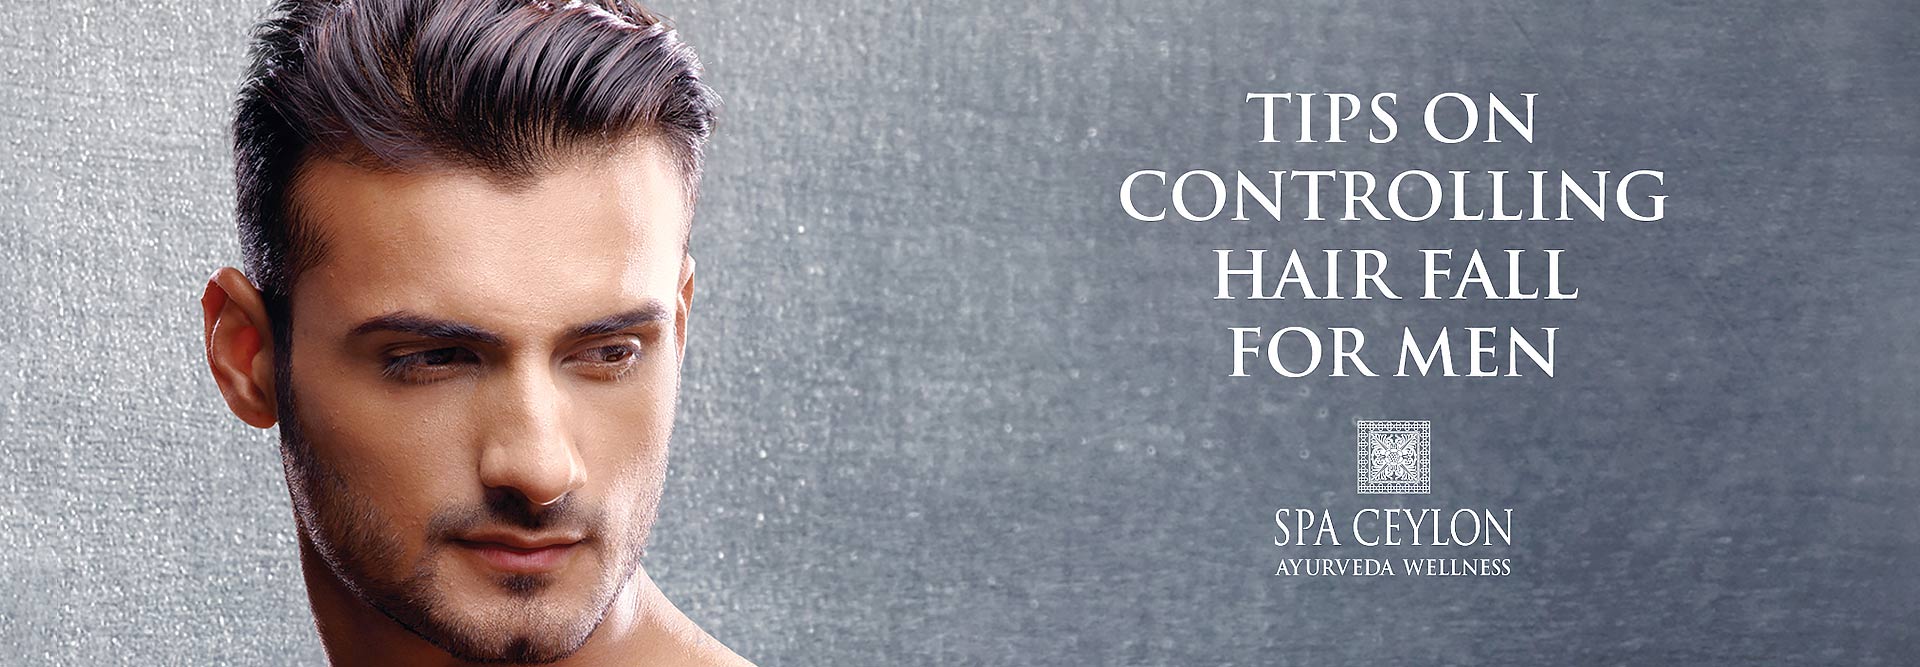 Tips on Controlling Hair Fall for Men